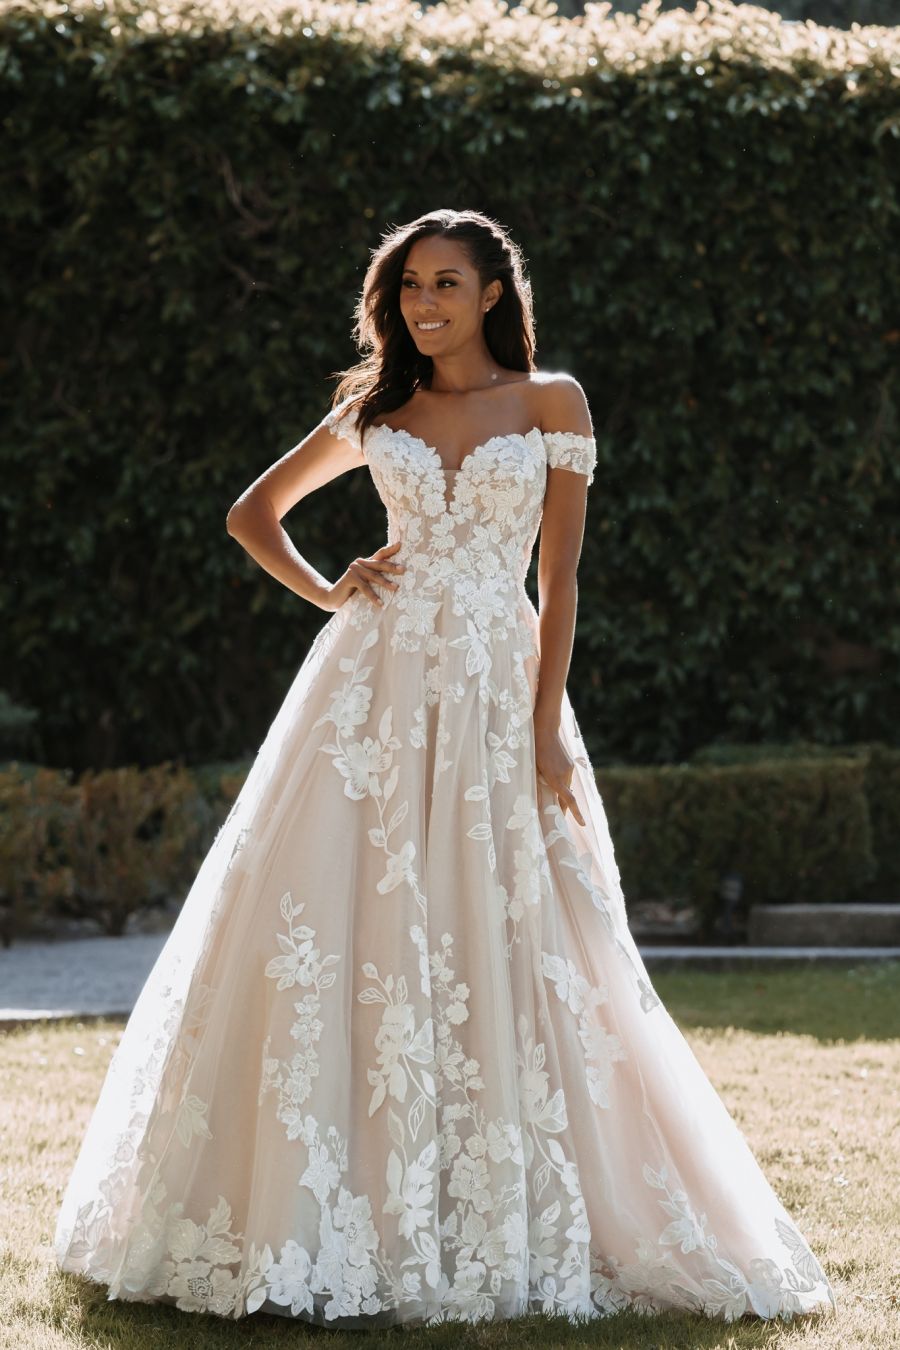 Off The Shoulder Ballgown Wedding Dress With Florals On Bodice And